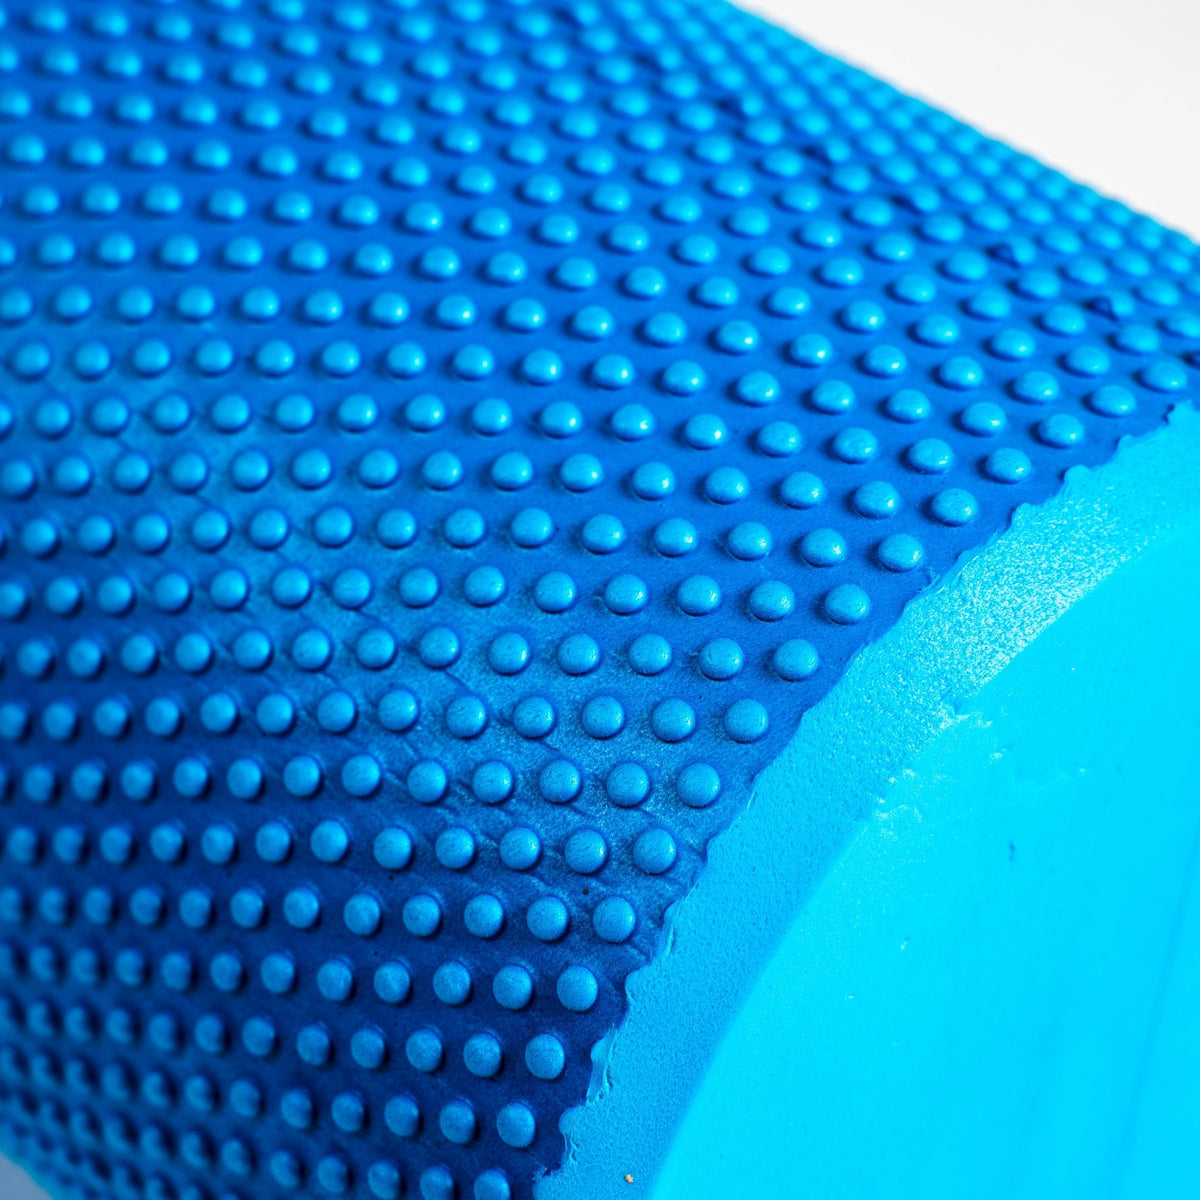 FitWay Equip. EVA FOAM ROLLERS - Fitness Experience